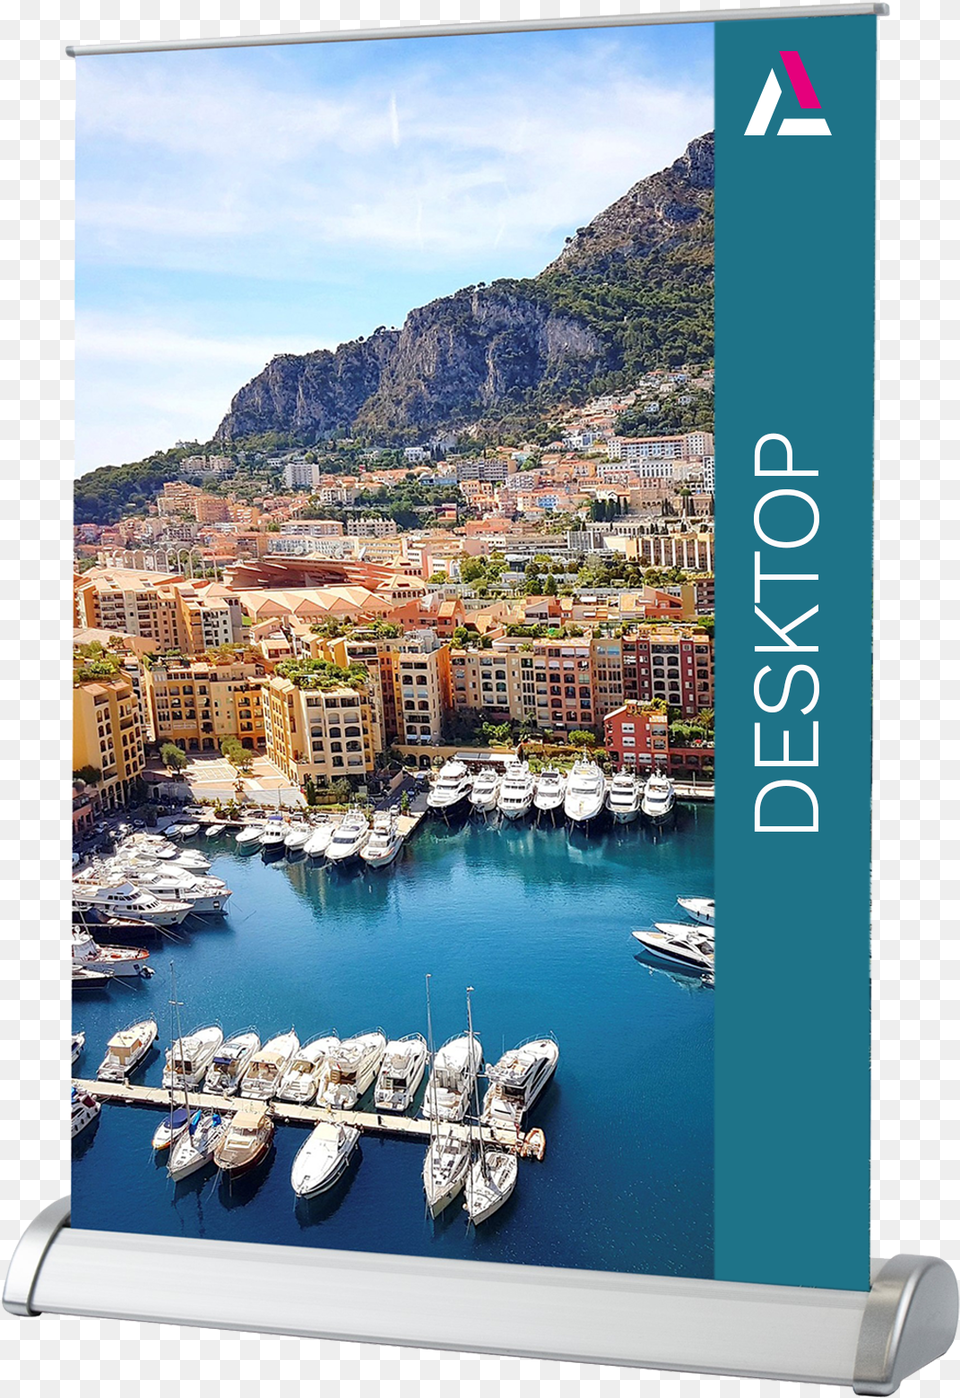 Single Sided A4 Amp A3 Desktop Roll Up Bannerstitle Port De Fontvieille, Yacht, Waterfront, Water, Vehicle Png